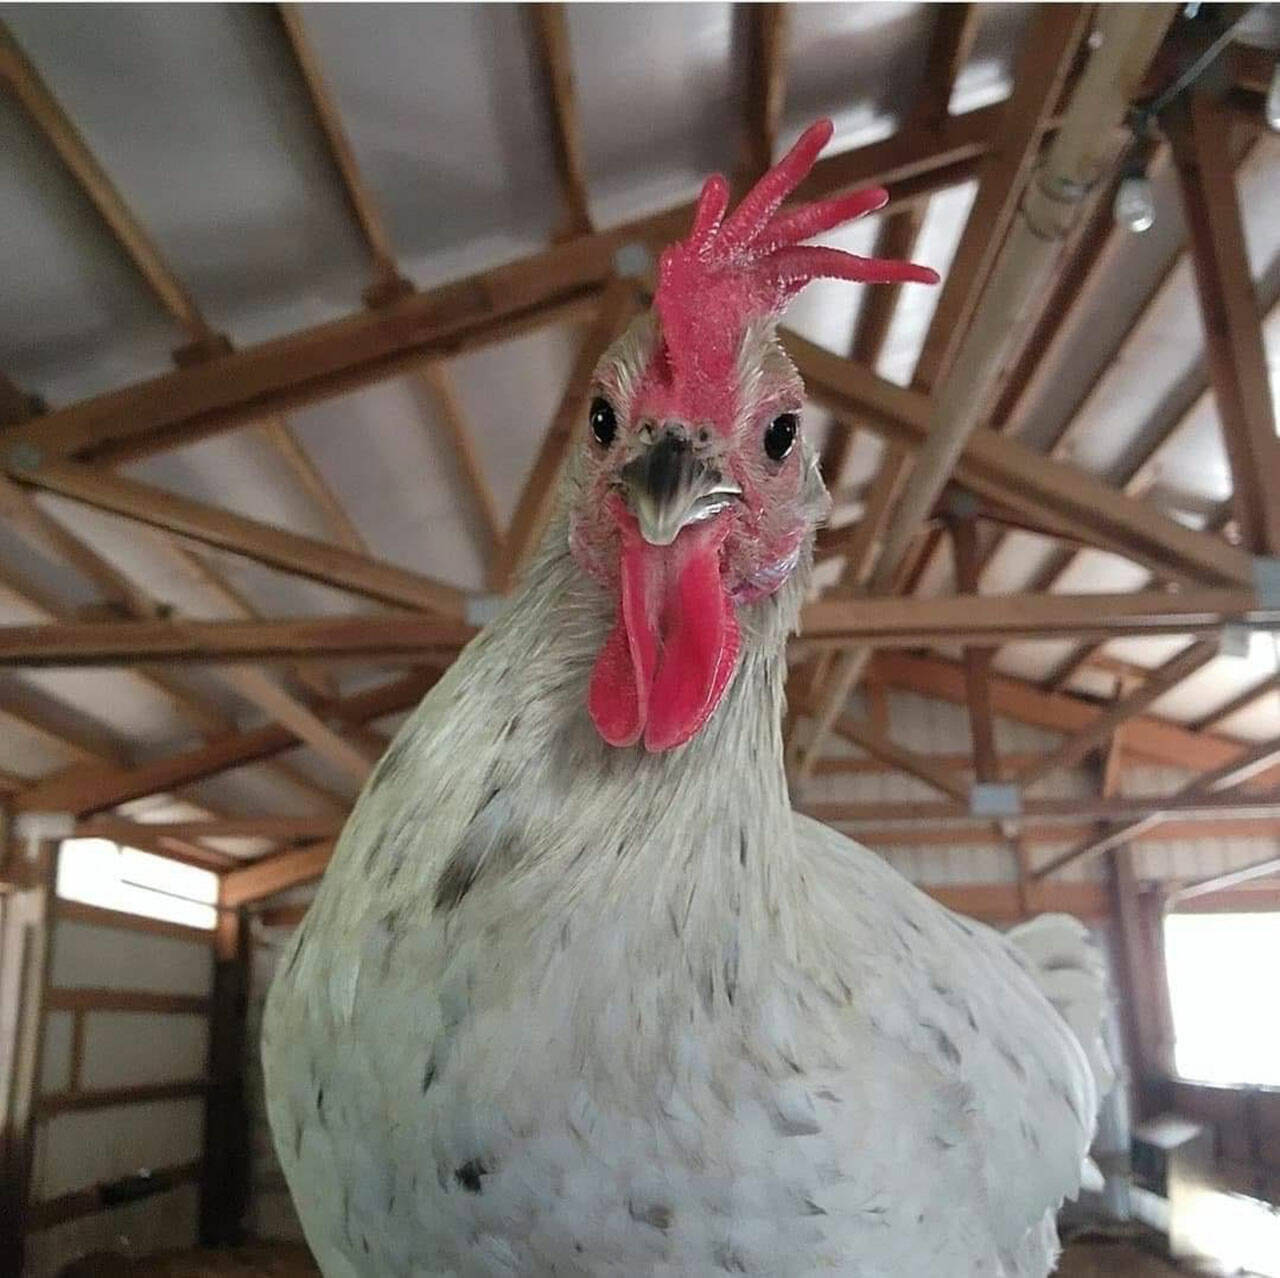 (Courtesy Rebecca Gibbons) Kawasaki the chicken, in isolation at The Old Goats Home & Rescue.